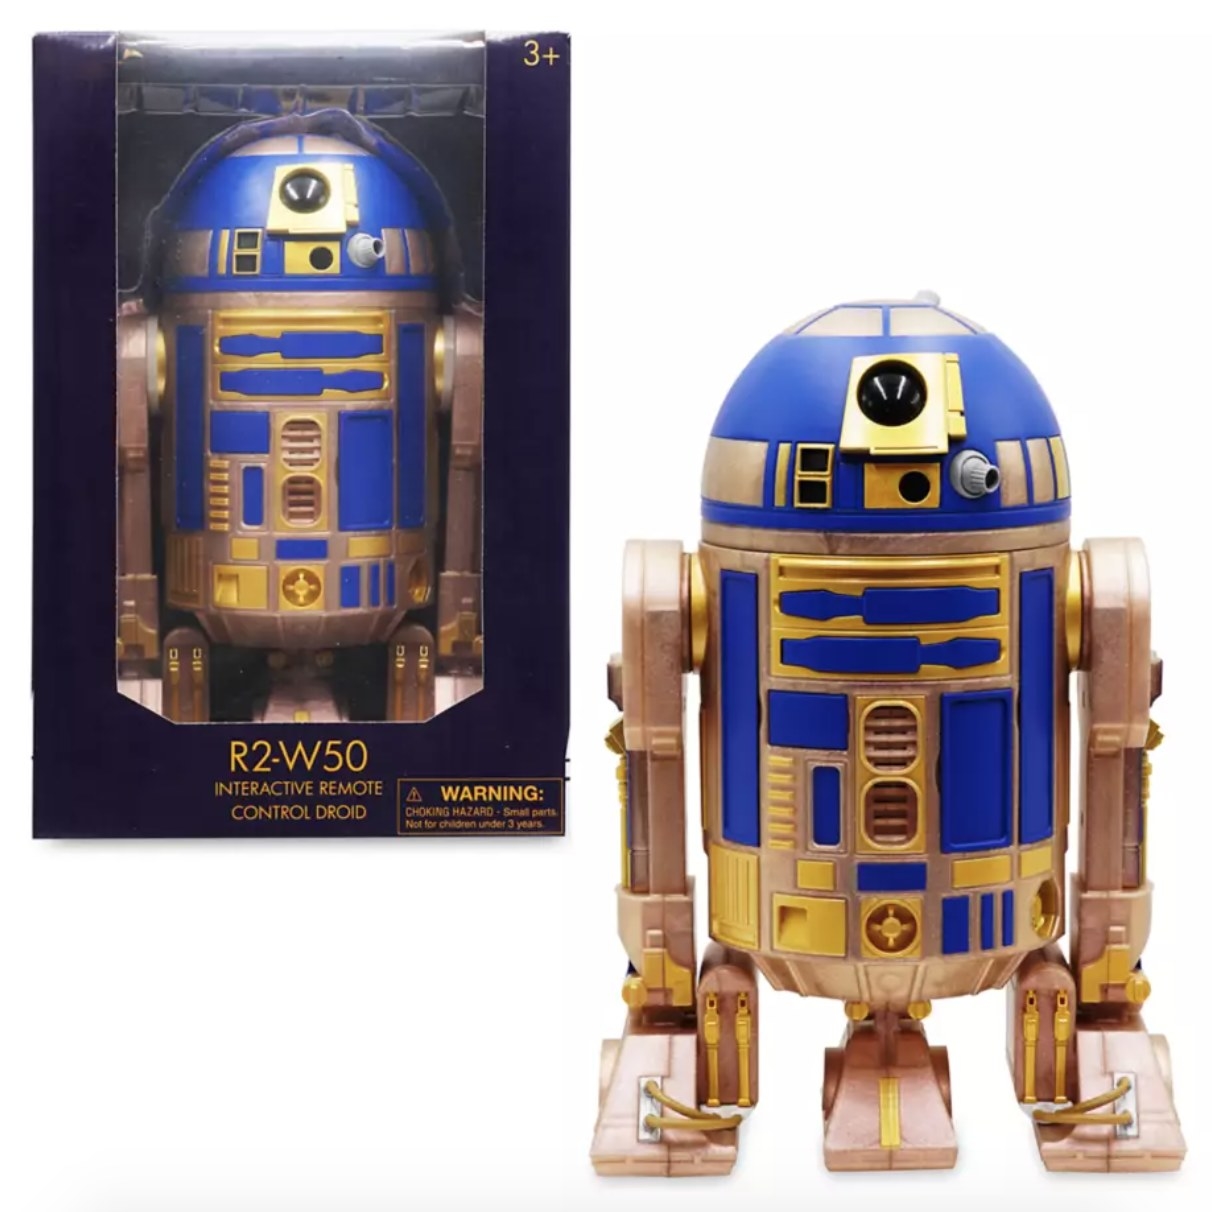 The R2 droid